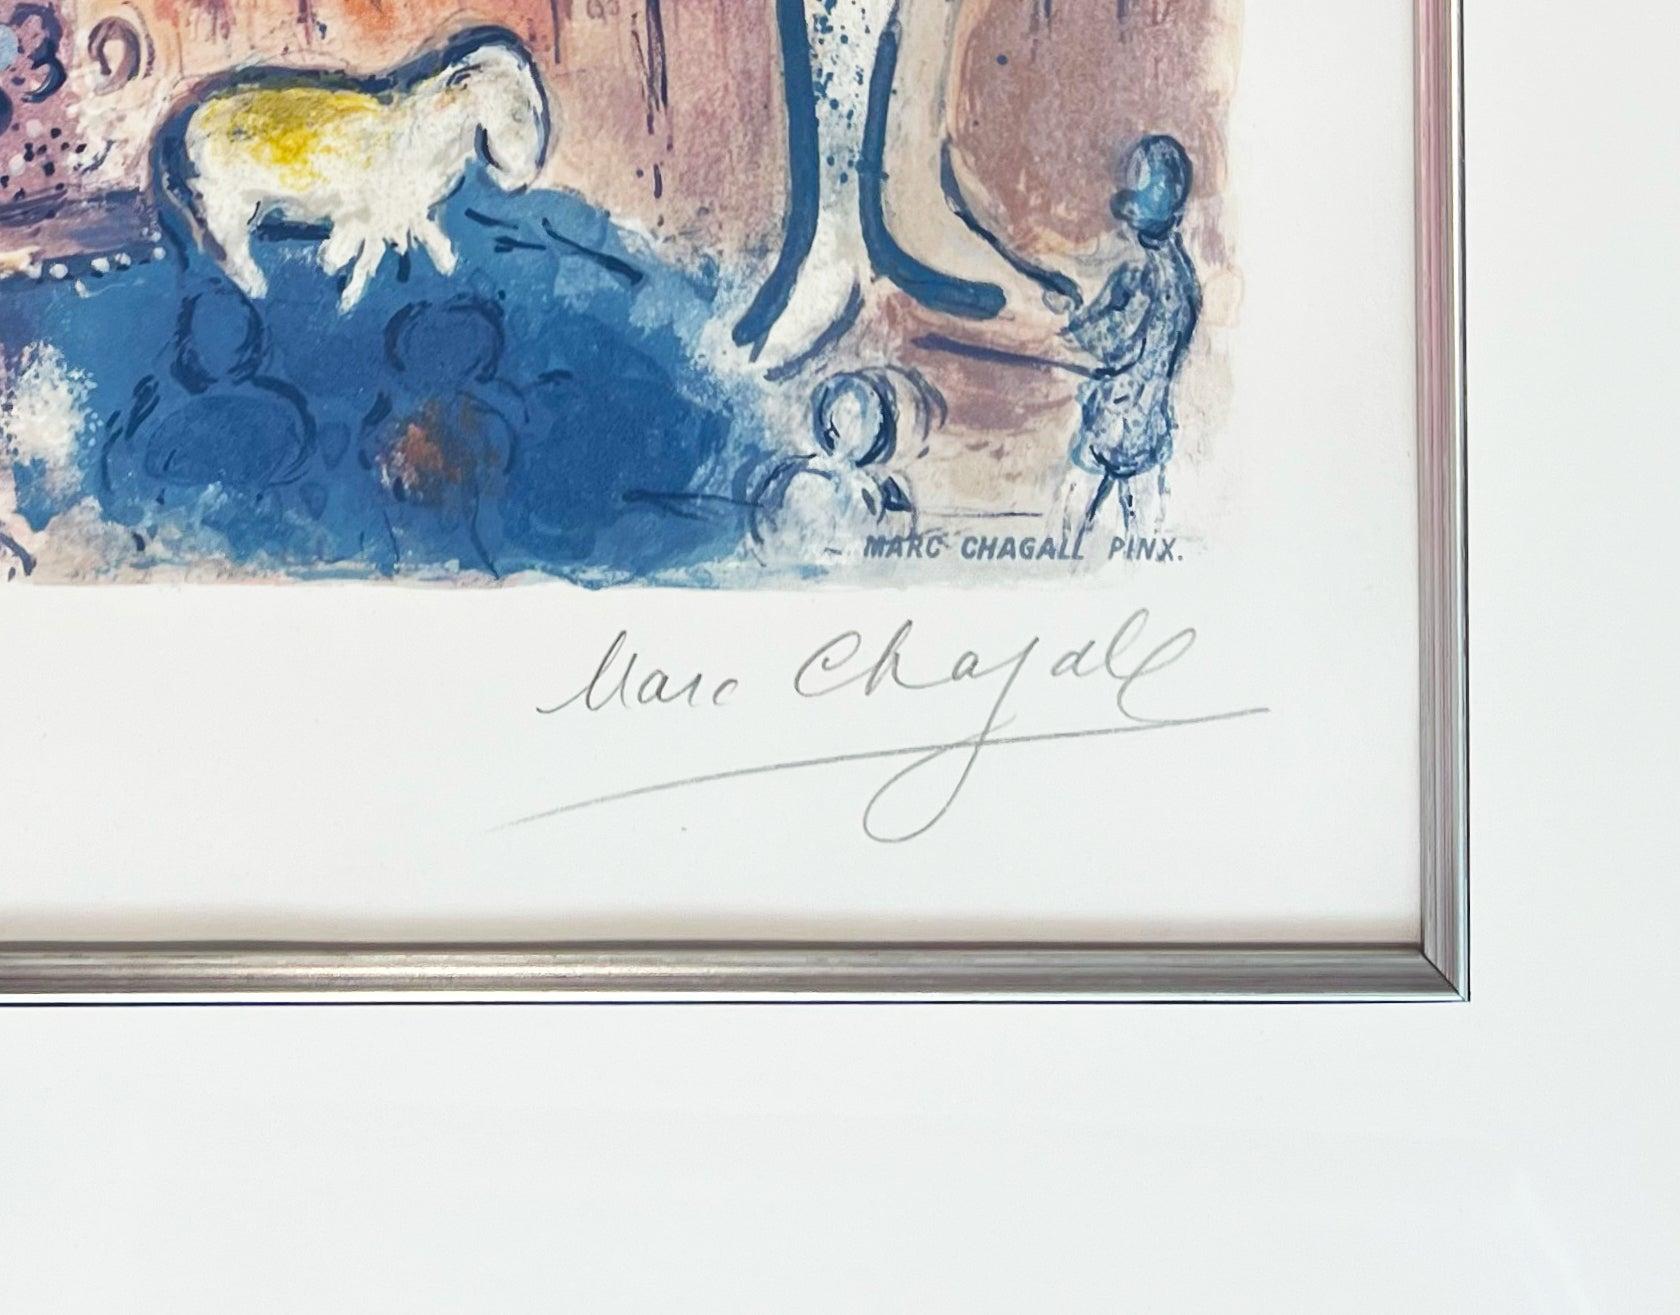 Artist: Marc Chagall (after)
Title: Avenue De La Victoire at Nice
Portfolio: Nice and the Cote d'Azur
Medium: Lithograph
Date: 1967
Edition: LXIII/LXXV (aside from the of 150)
Frame Size: 37 1/2